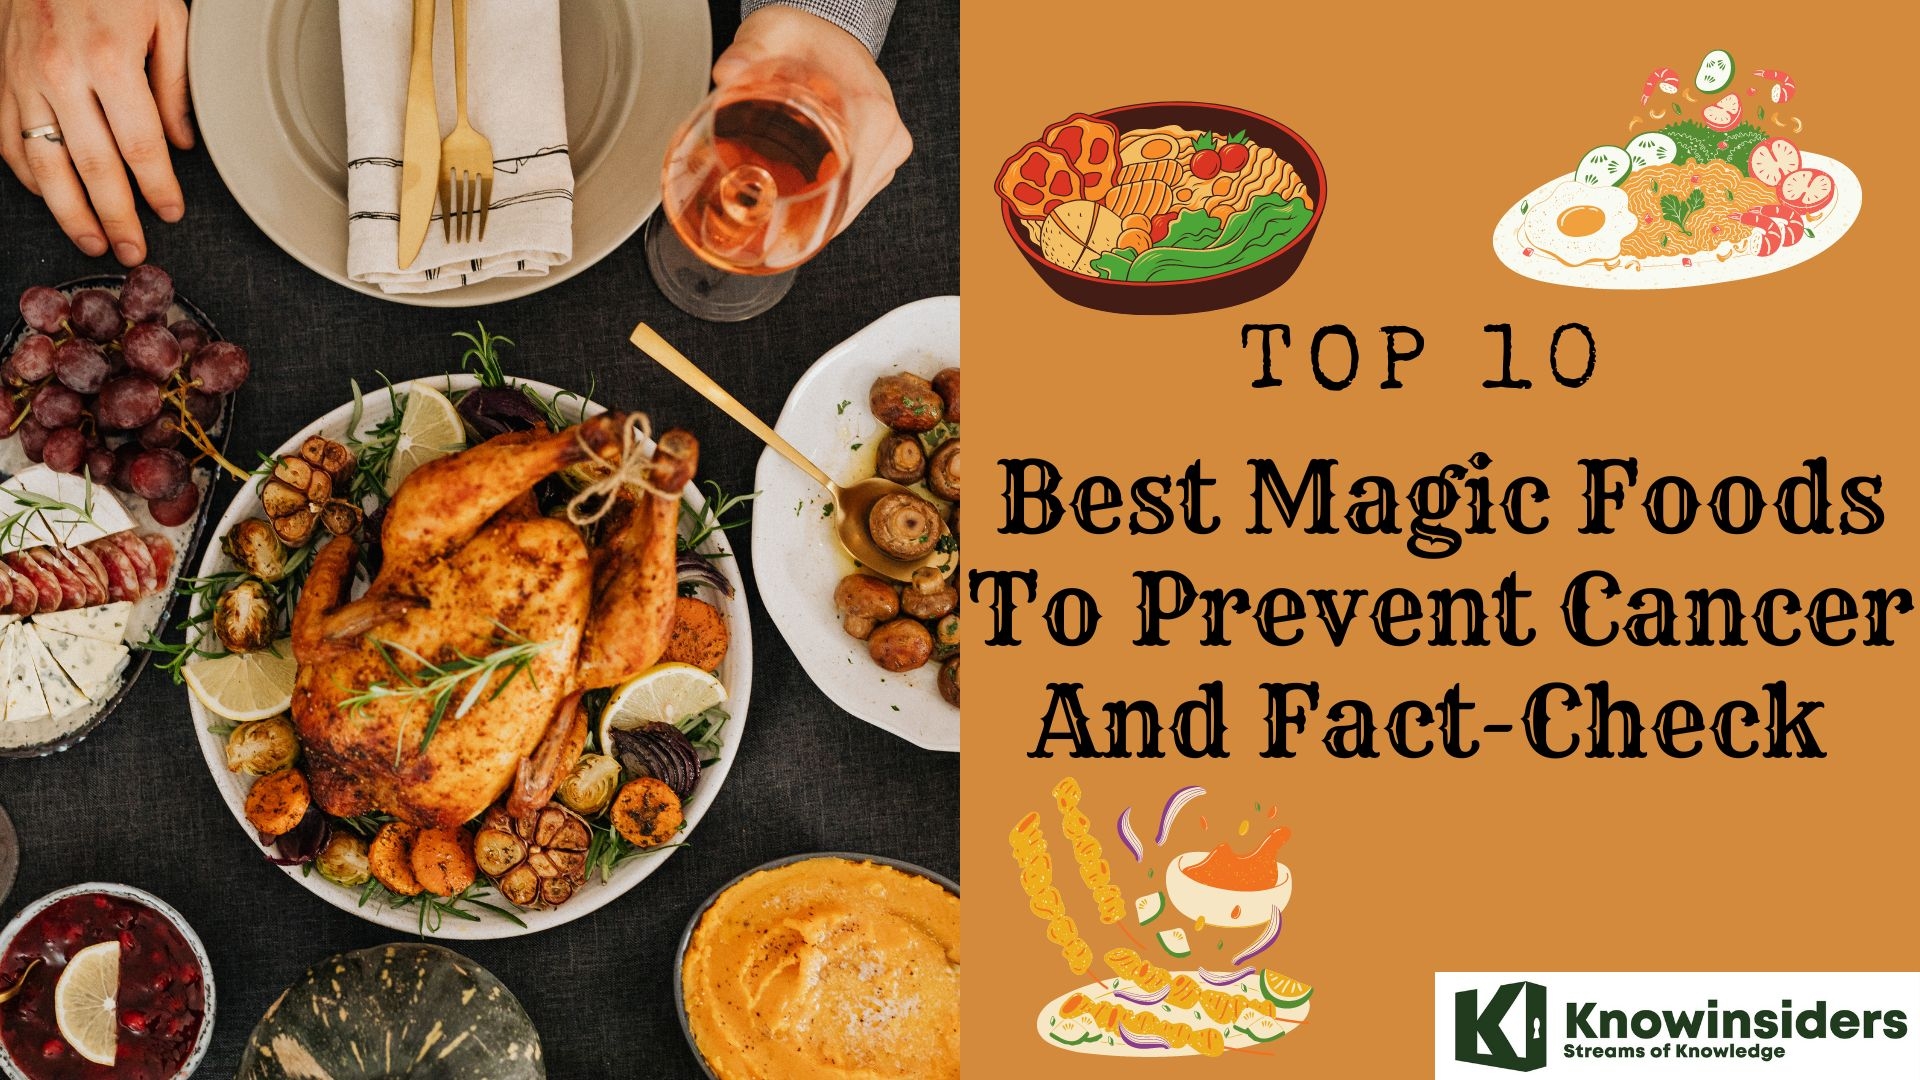 Top 10 Best Magic Foods To Prevent Cancer And Fact-Check  Knowinsiders.com 